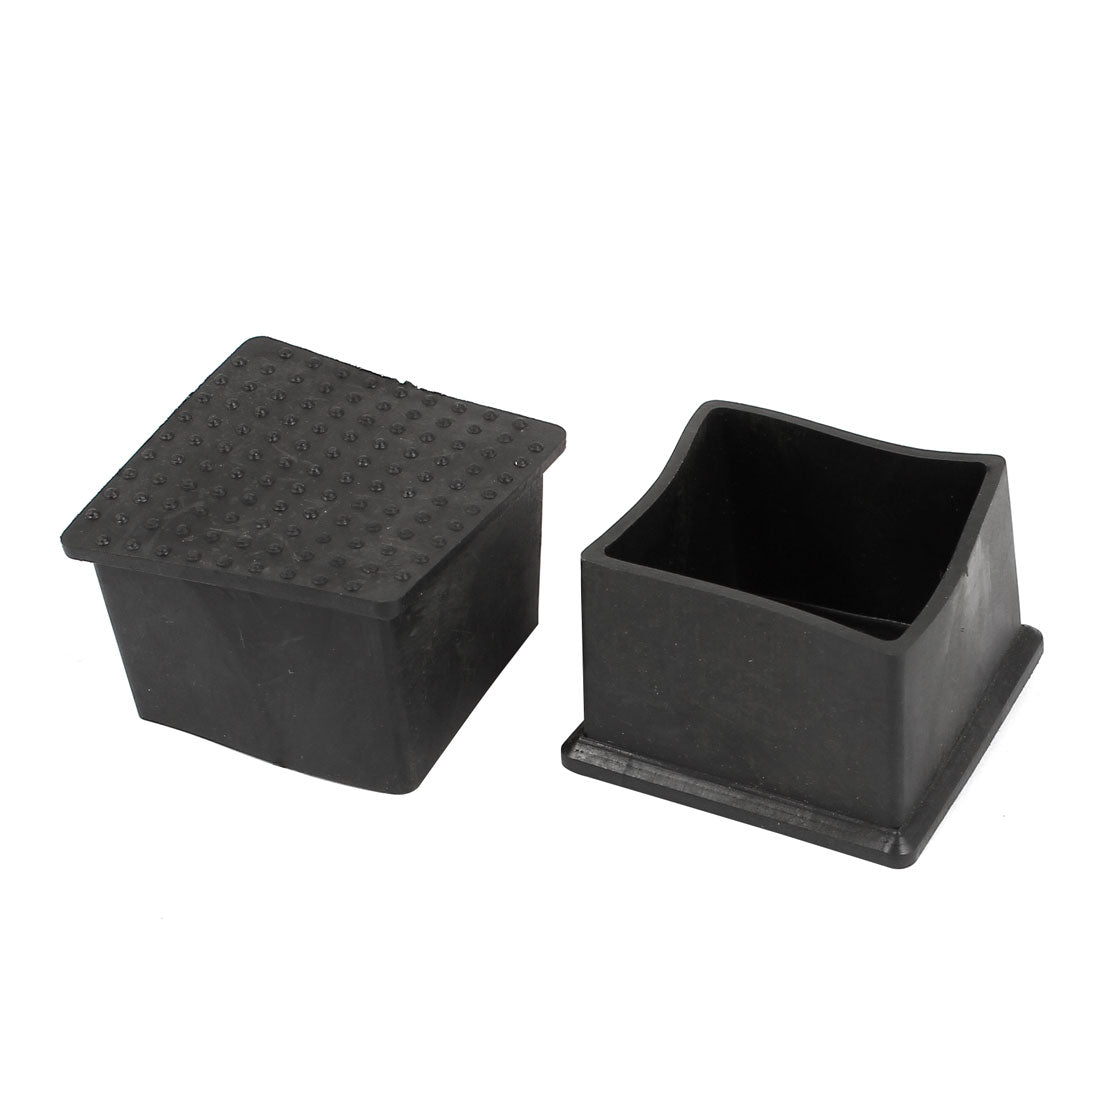 uxcell Uxcell 2 Pcs 45mm x 45mm Square Rubber Furniture Leg Foot Cover Holder Protector